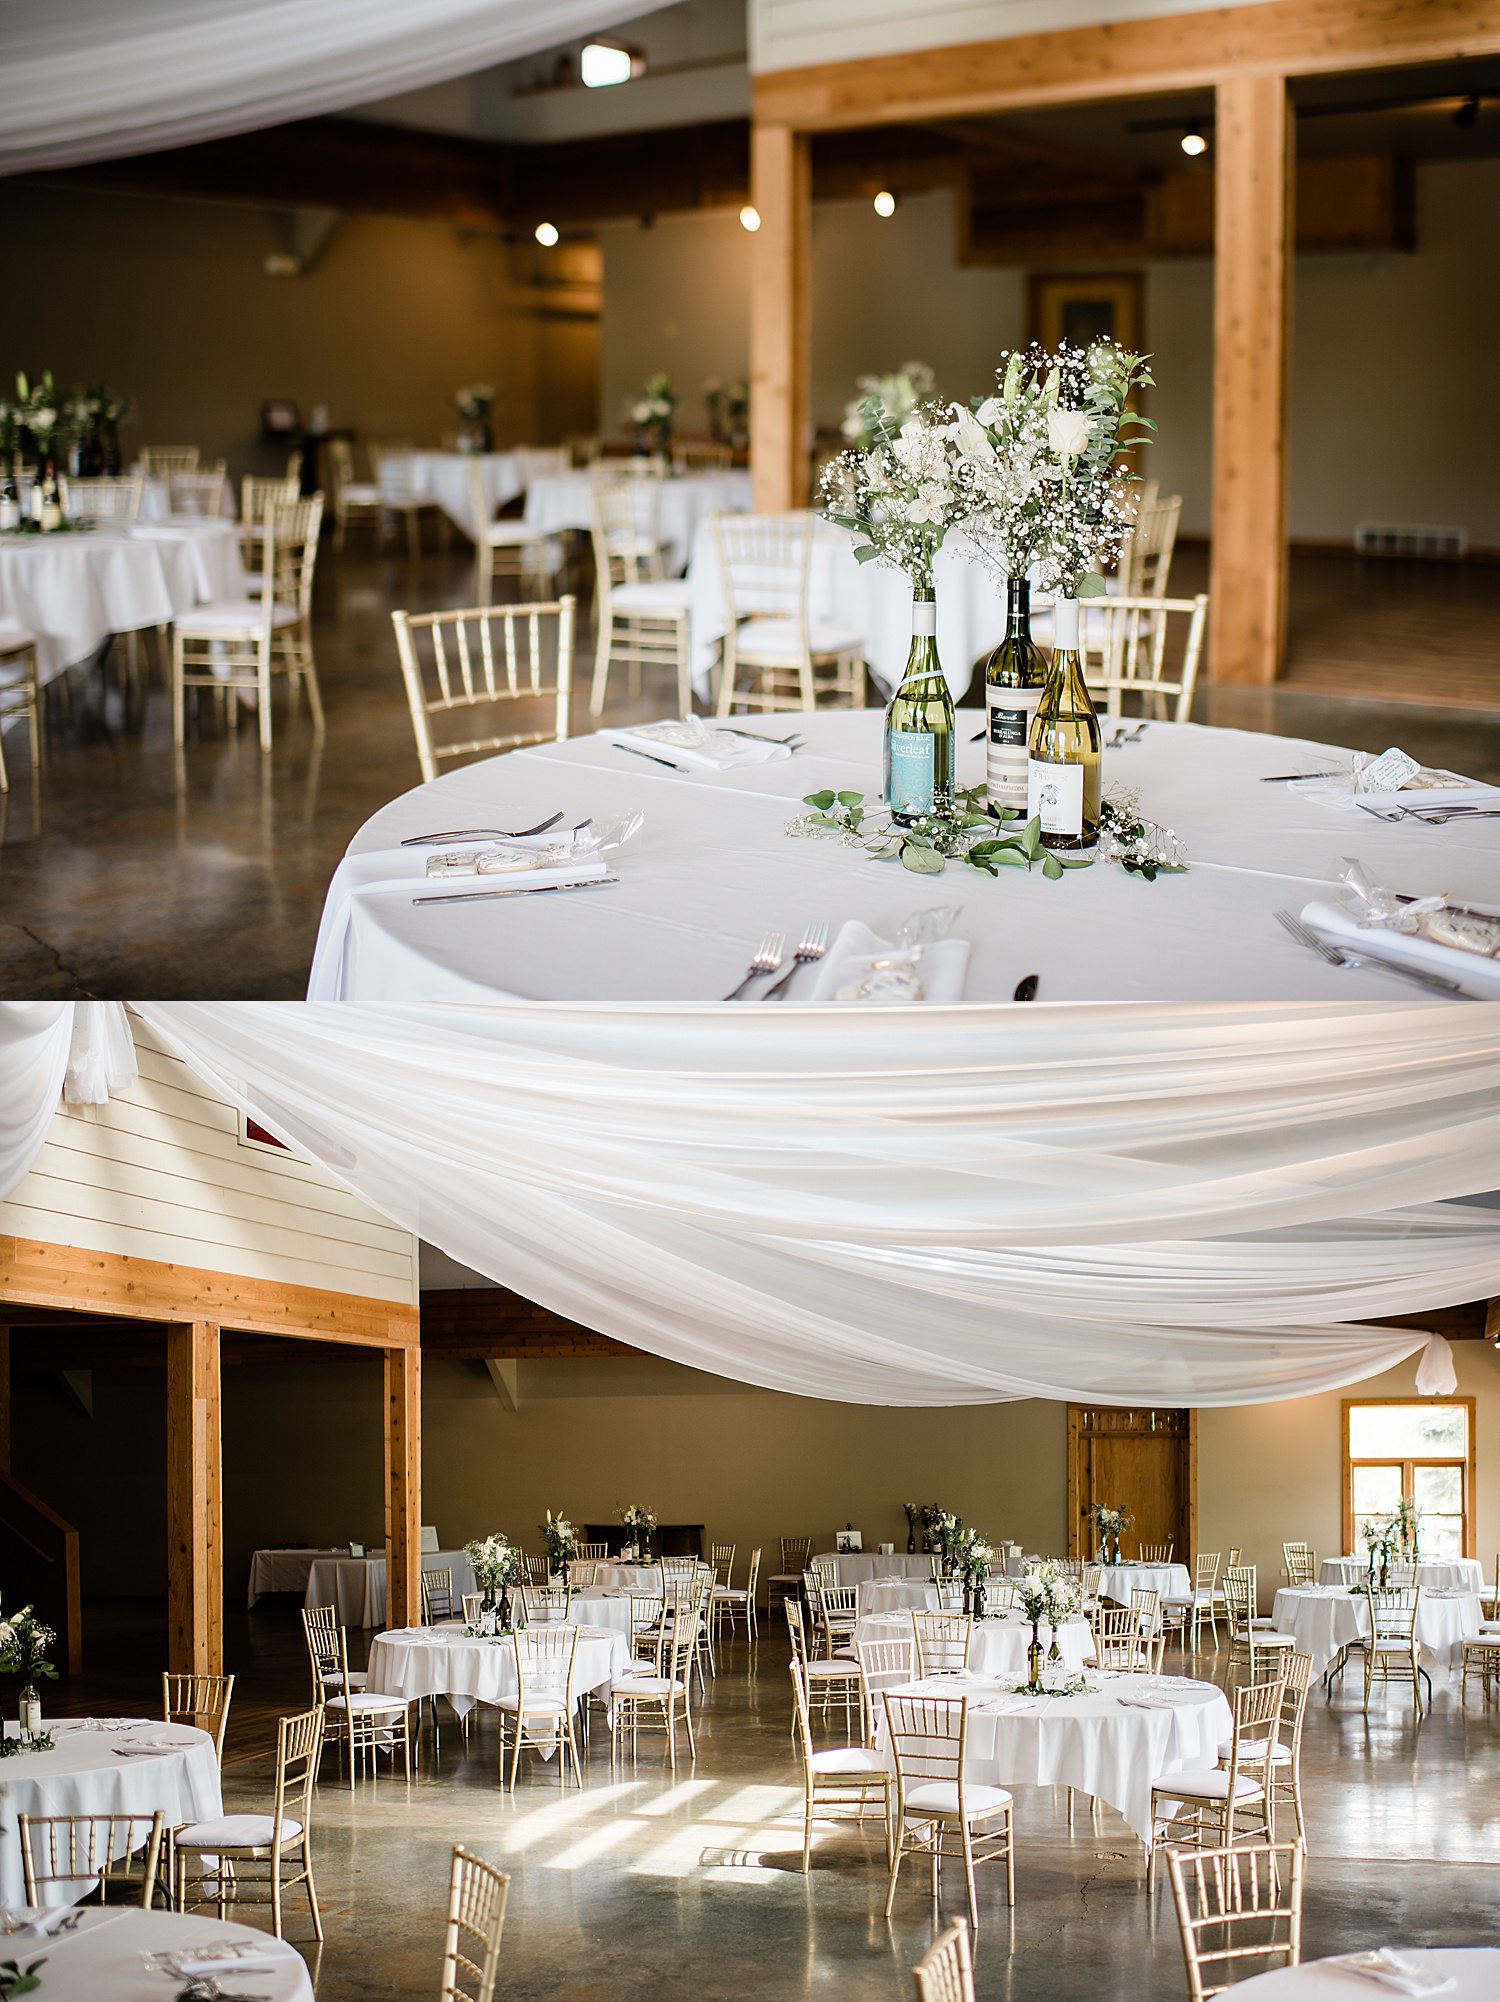 table details with white roses and greenery at Fenton winery and brewery wedding venue